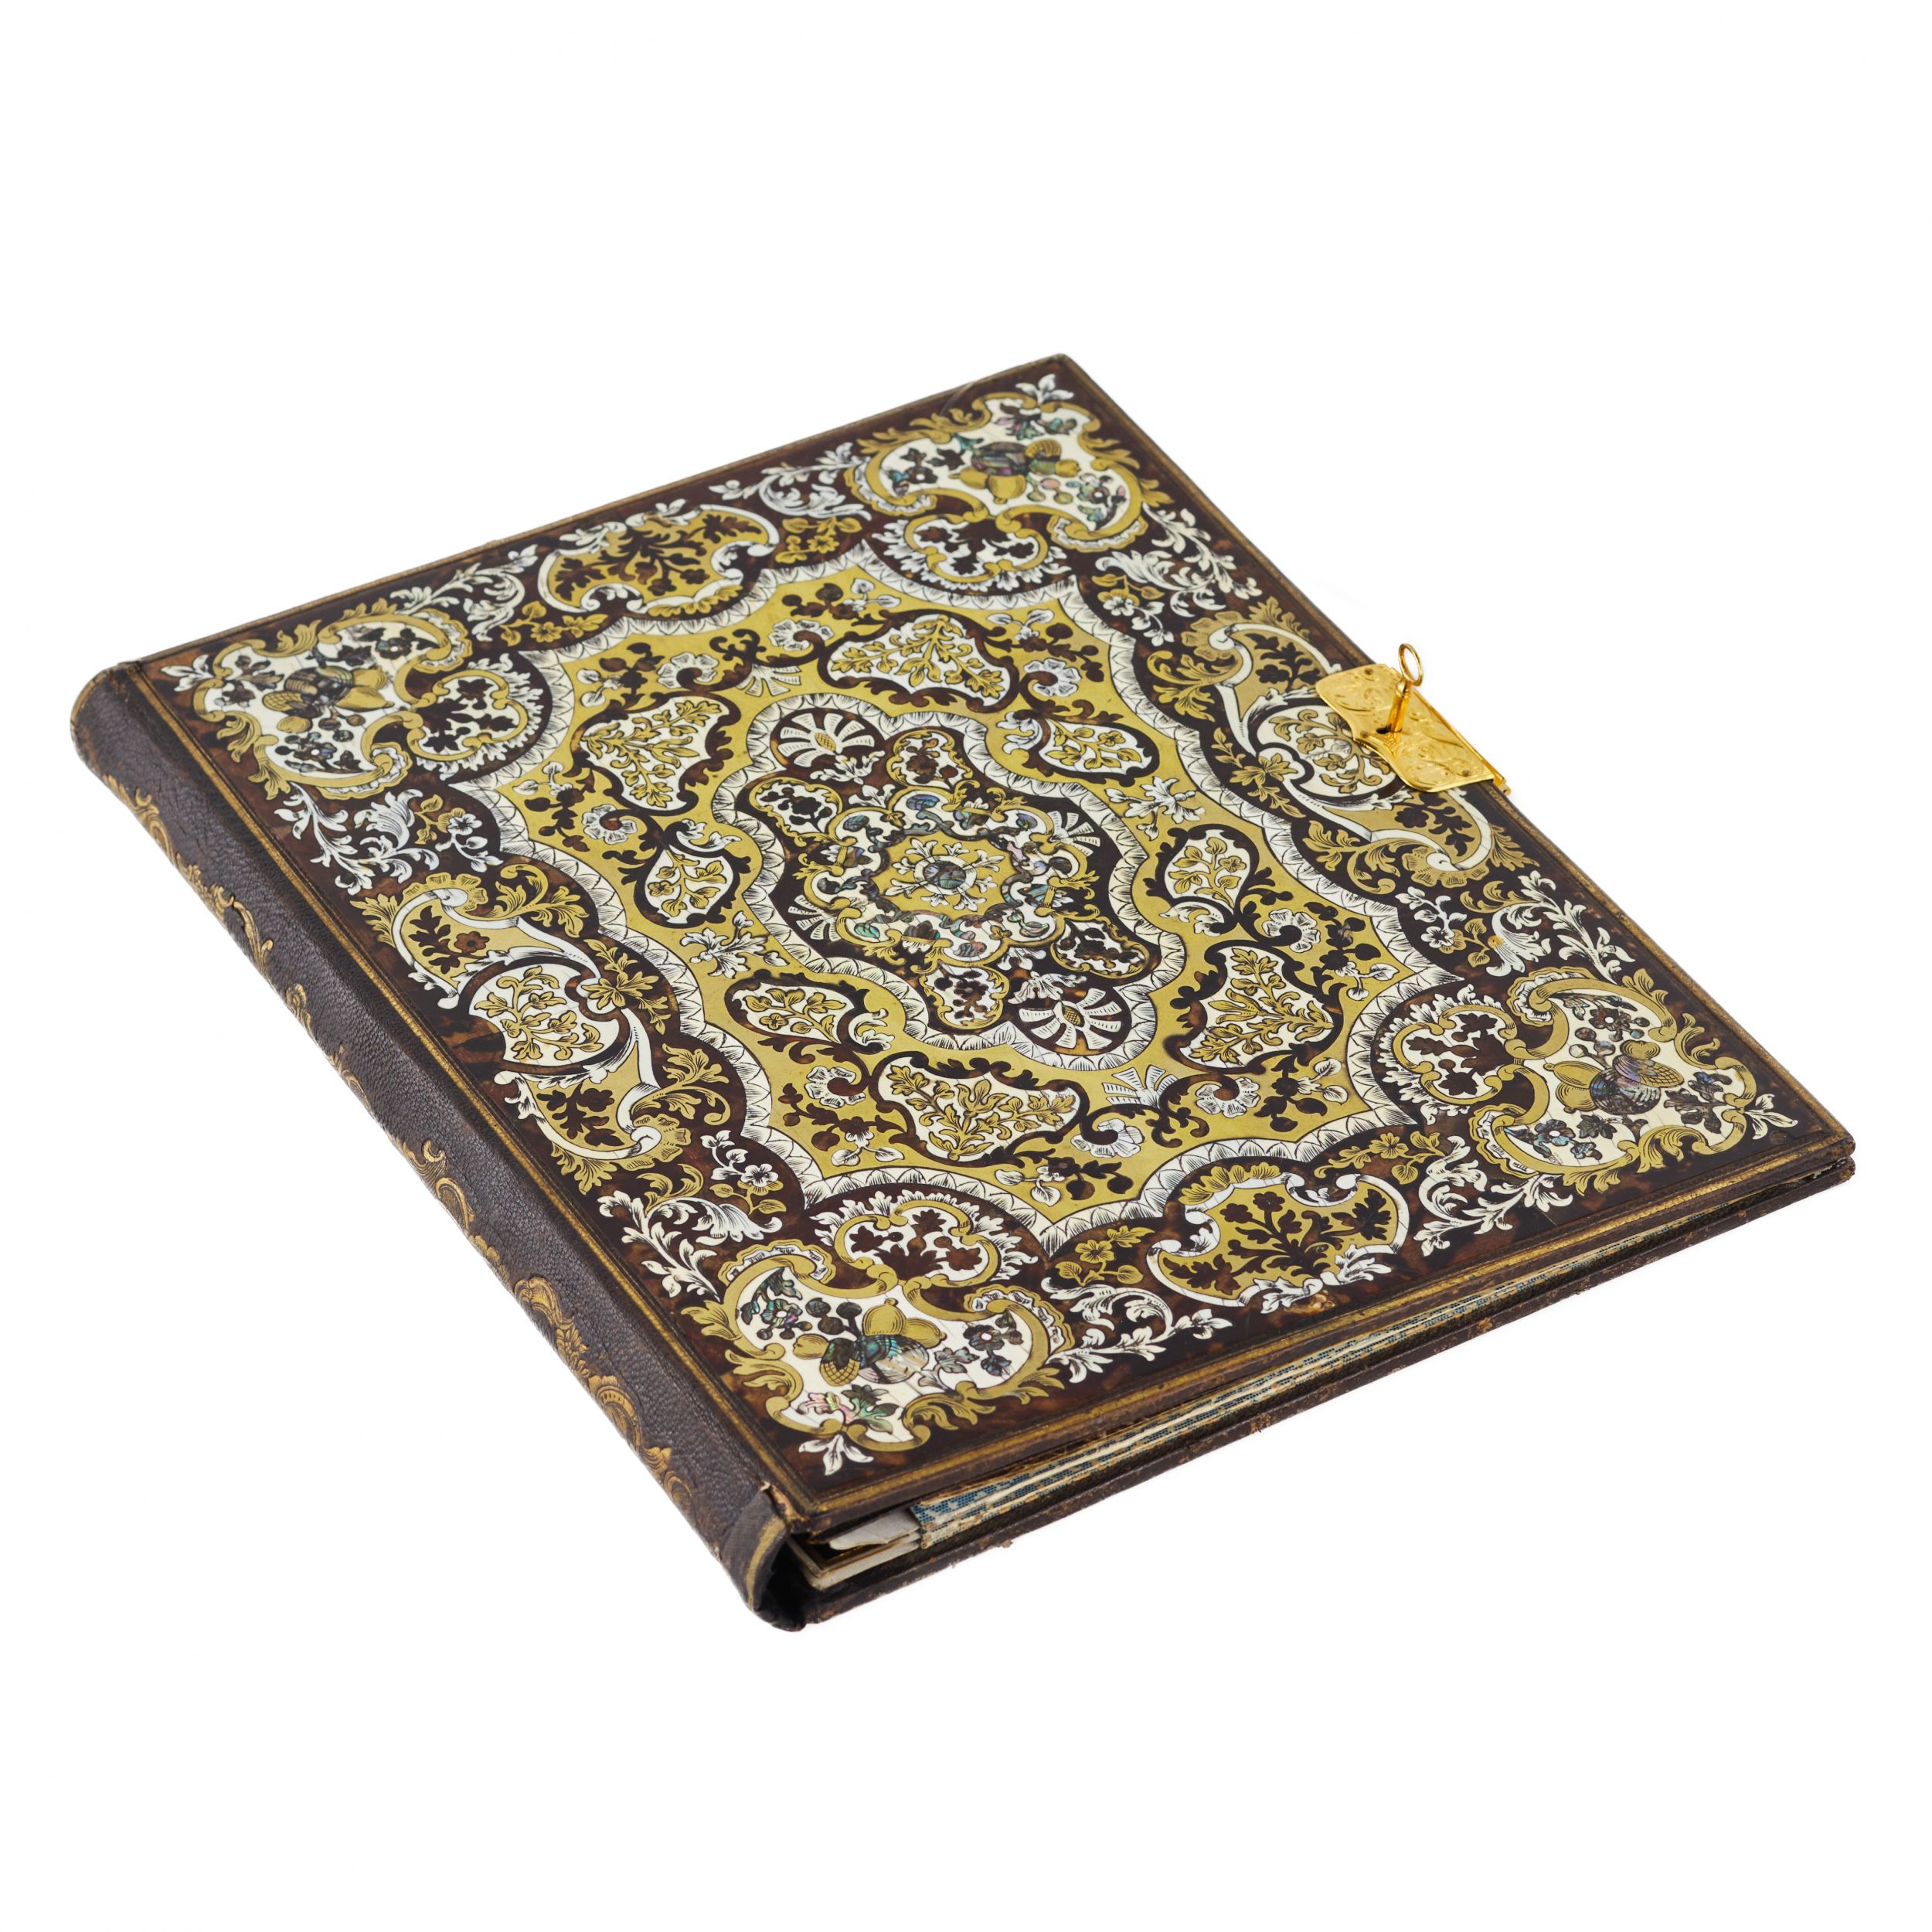 Address-folder-in-Boulle-style-France-19th-20th-century